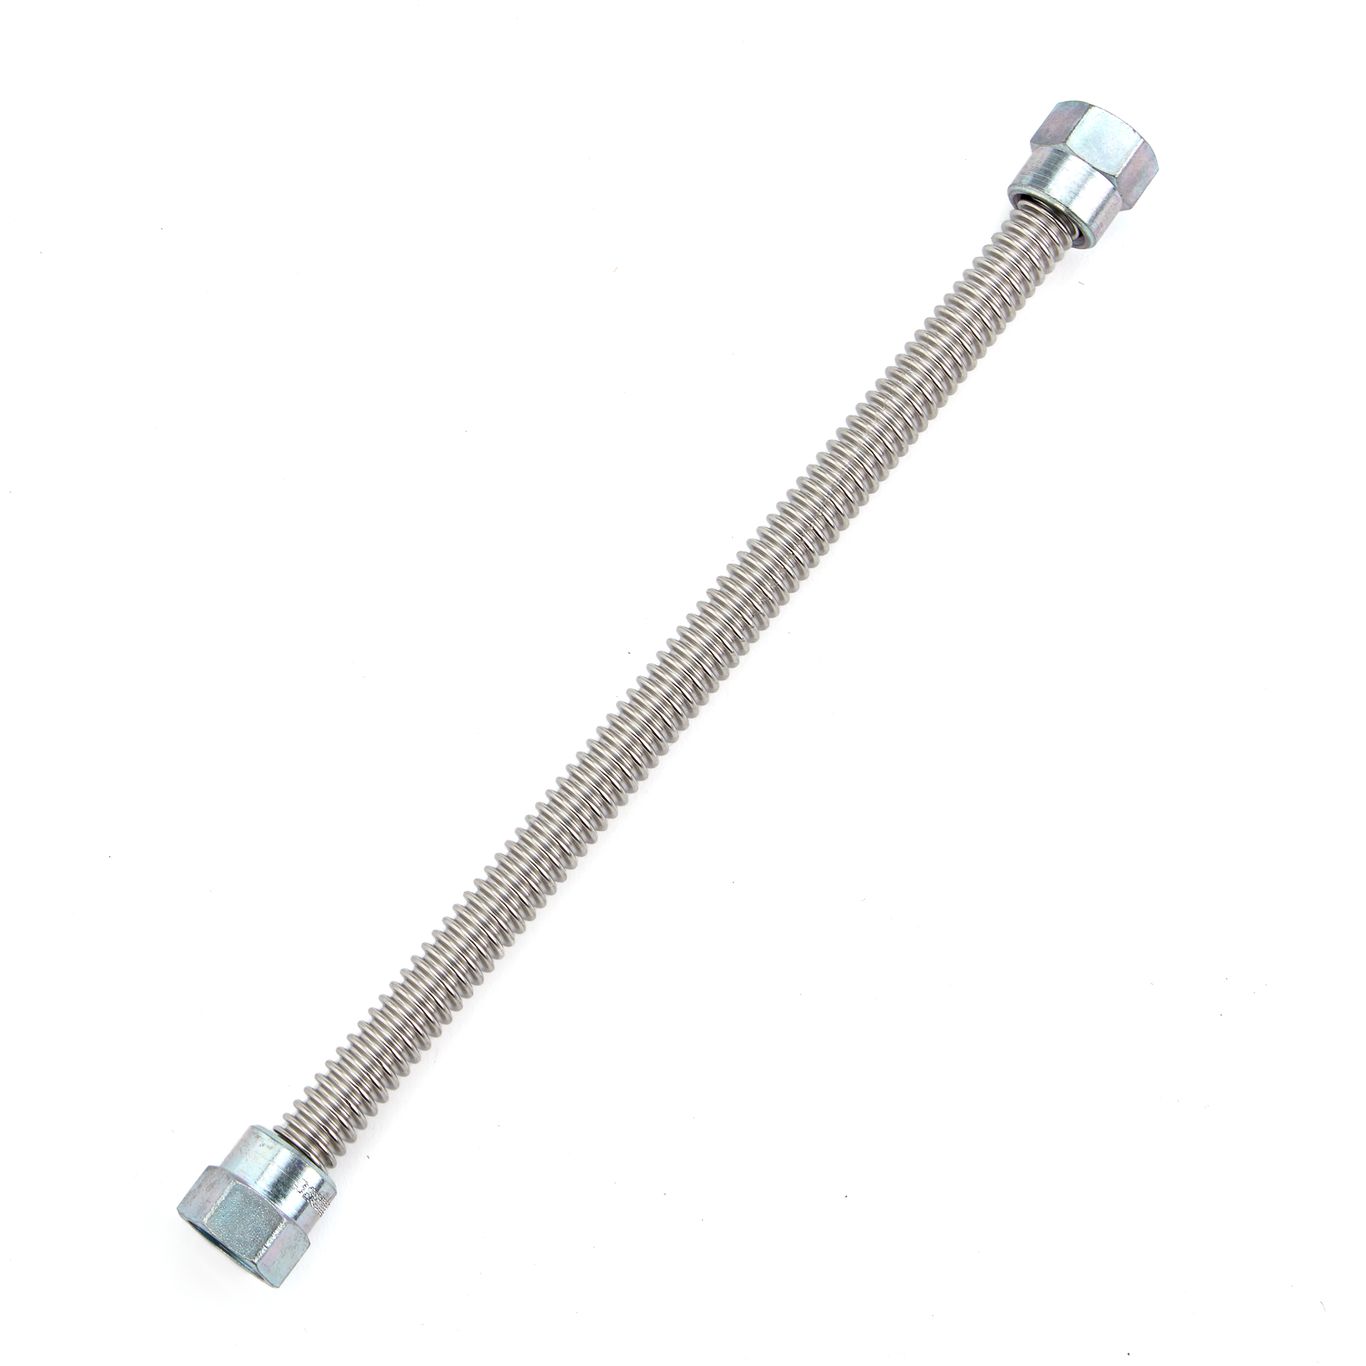 Gas Connector, 1/4 Inch Inner Dia., 3/8 Inch Flare Nuts, 22 Inch Length